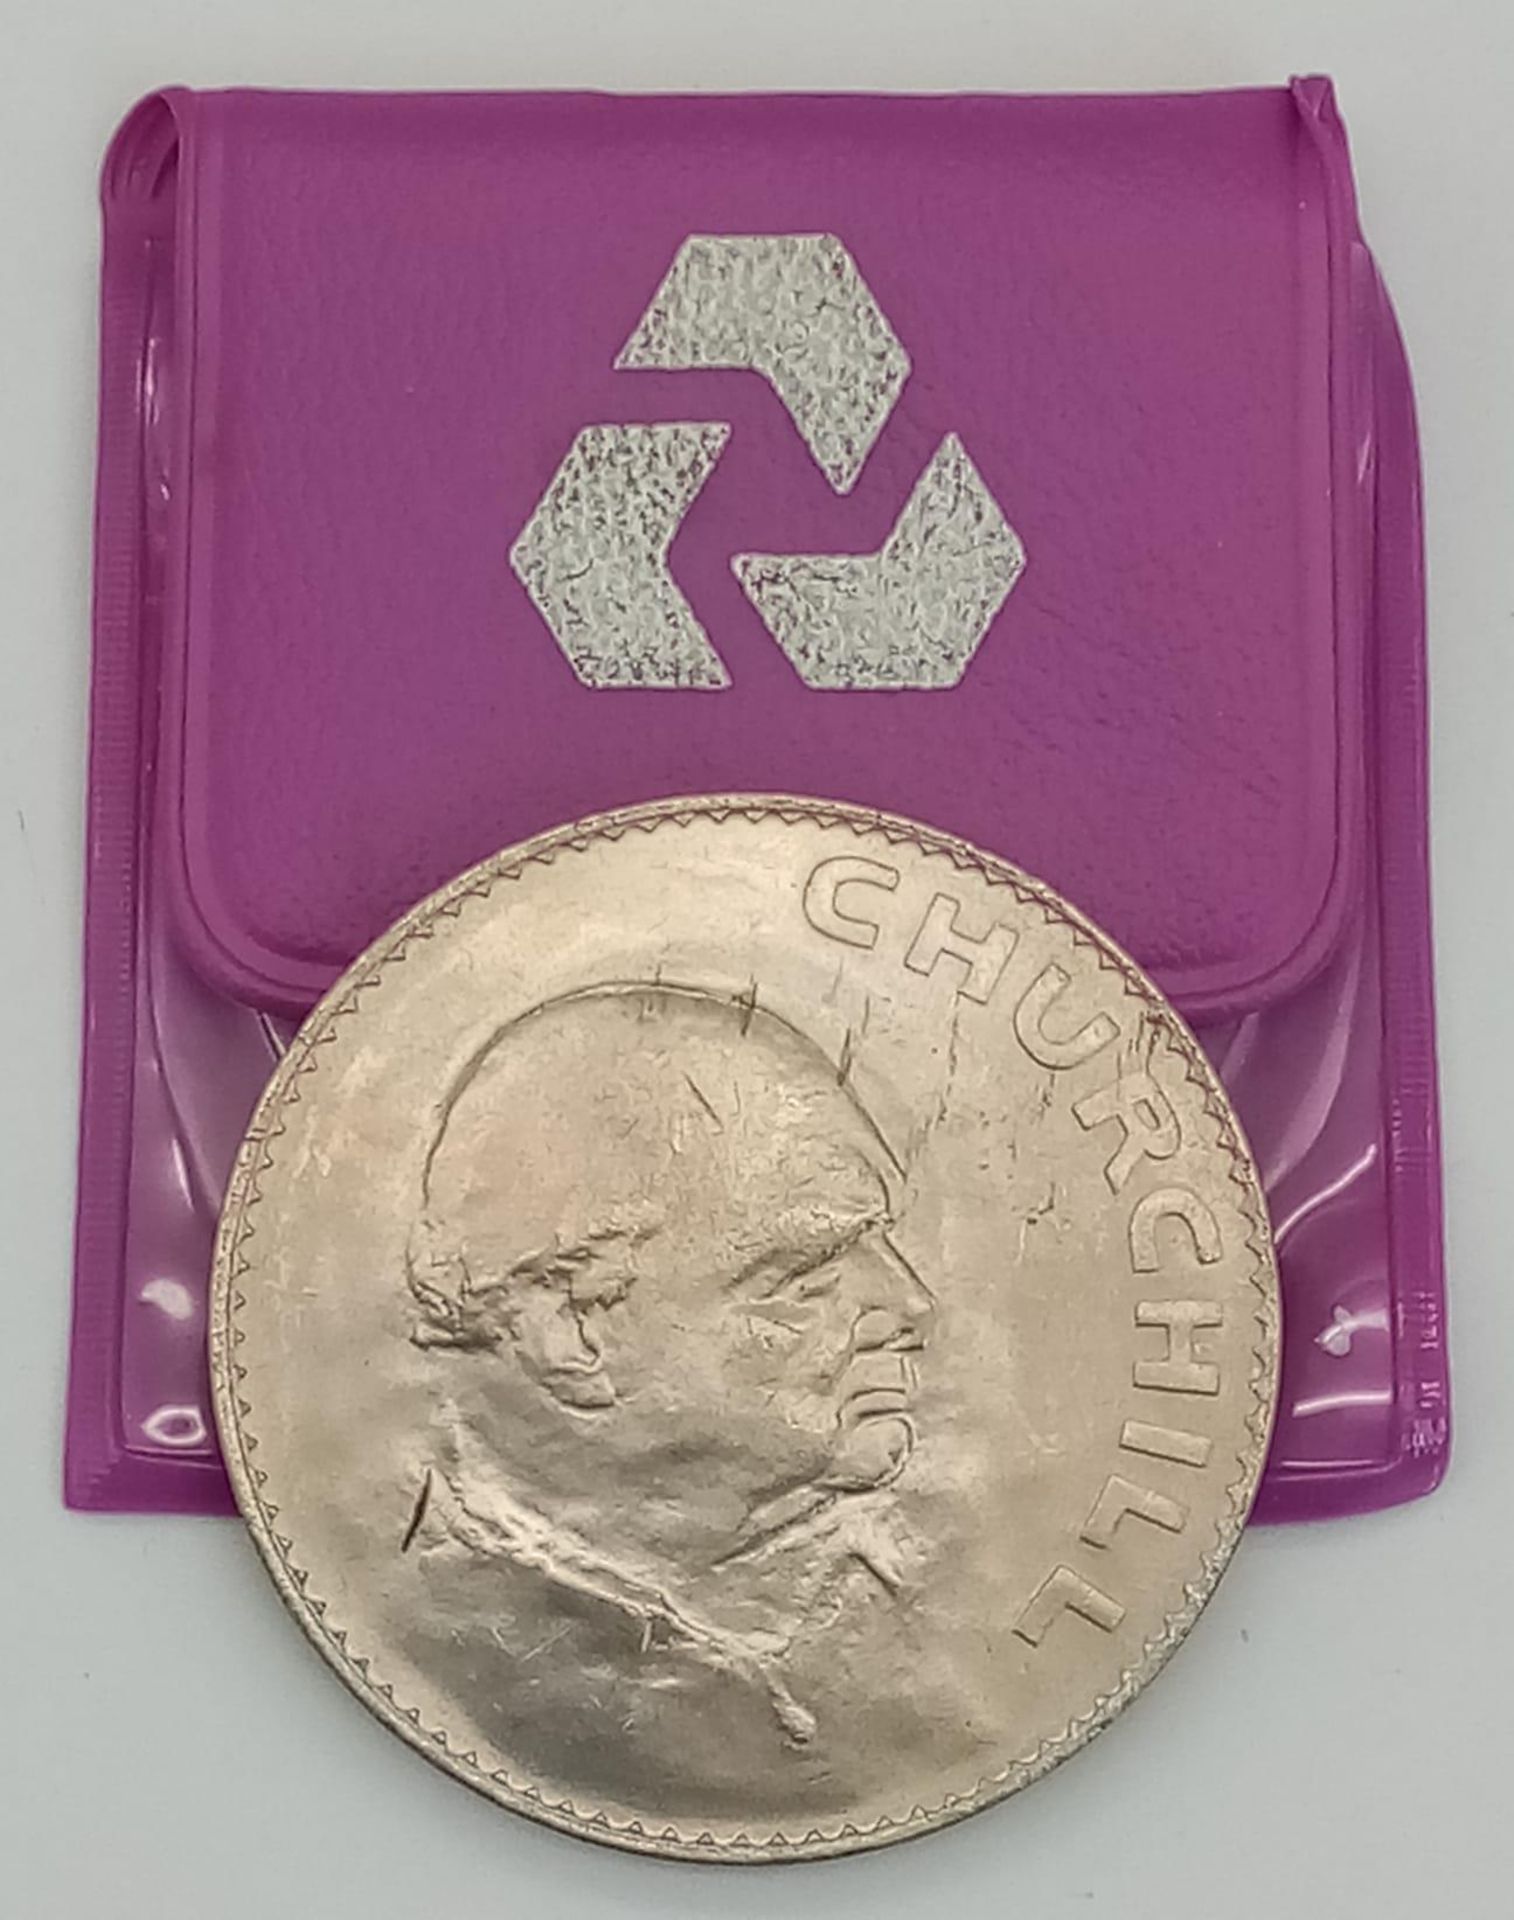 1965 CHURCHILL COIN - Image 2 of 2